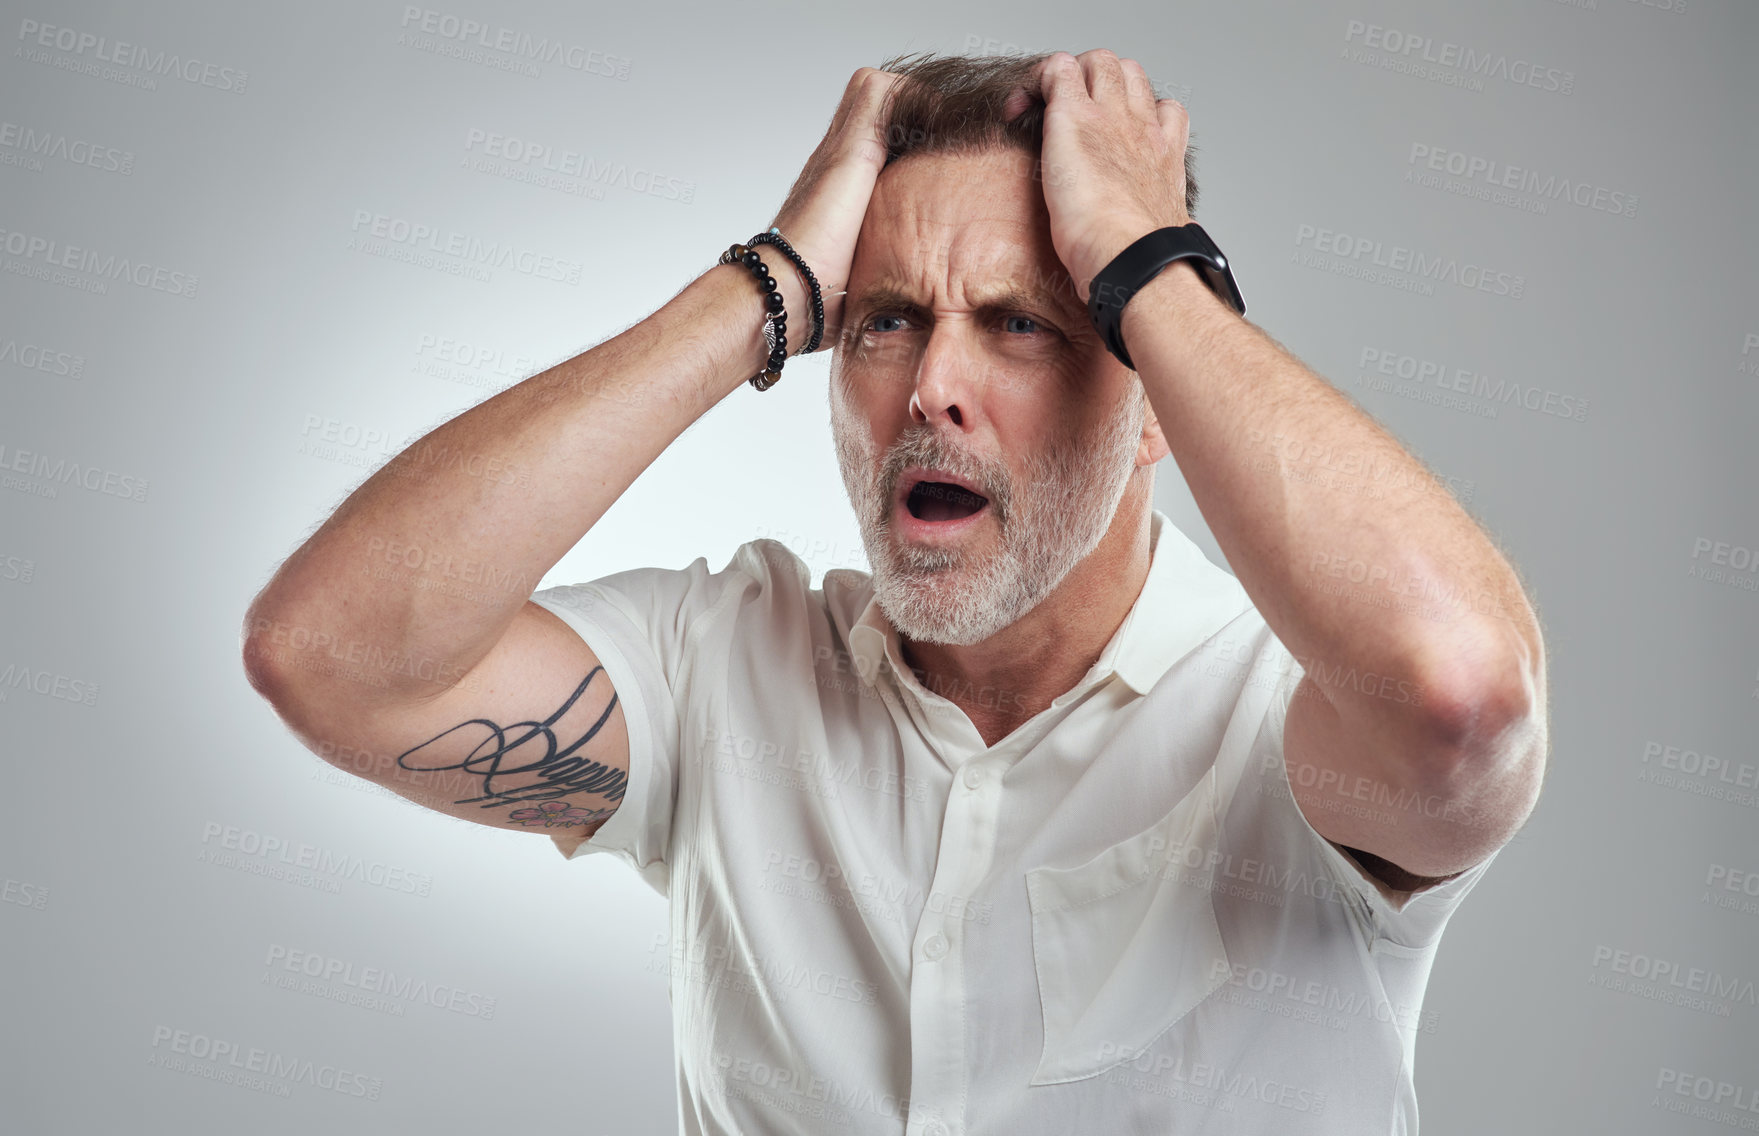 Buy stock photo Studio shot of a mature man looking disappointed against a grey background